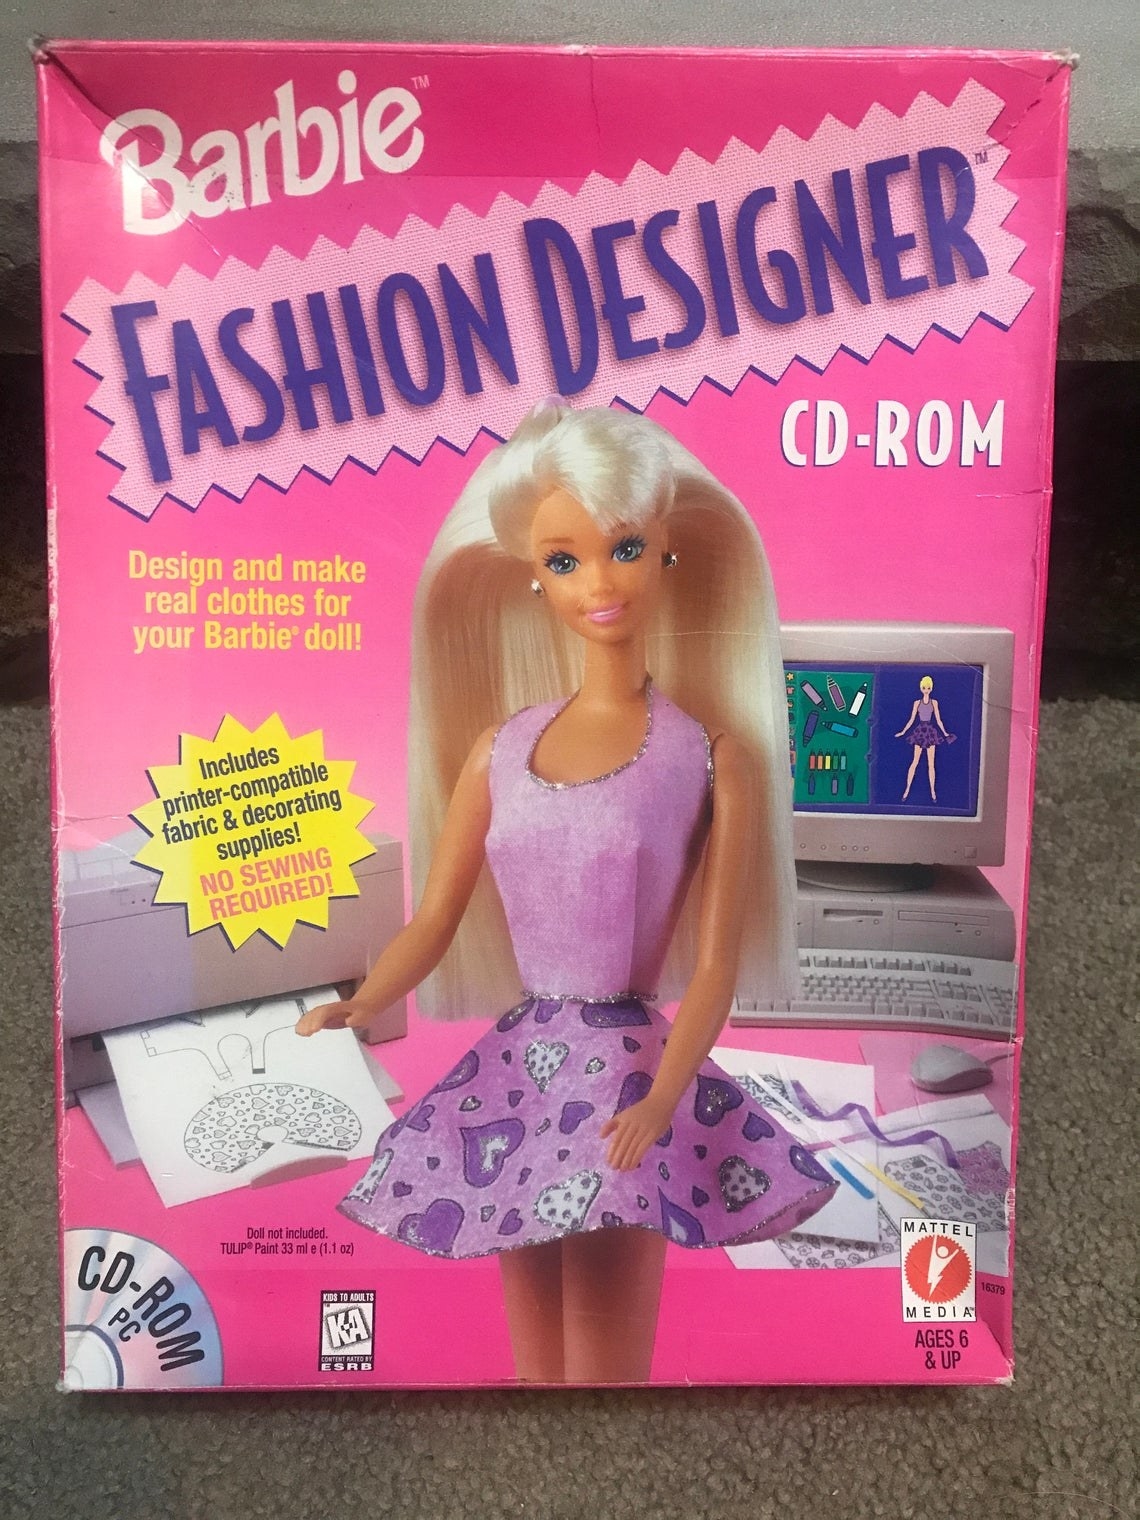 Photo of the Barbie Fashion Designer CD-ROM box which features a Barbie doll in a purple dress printing out a design